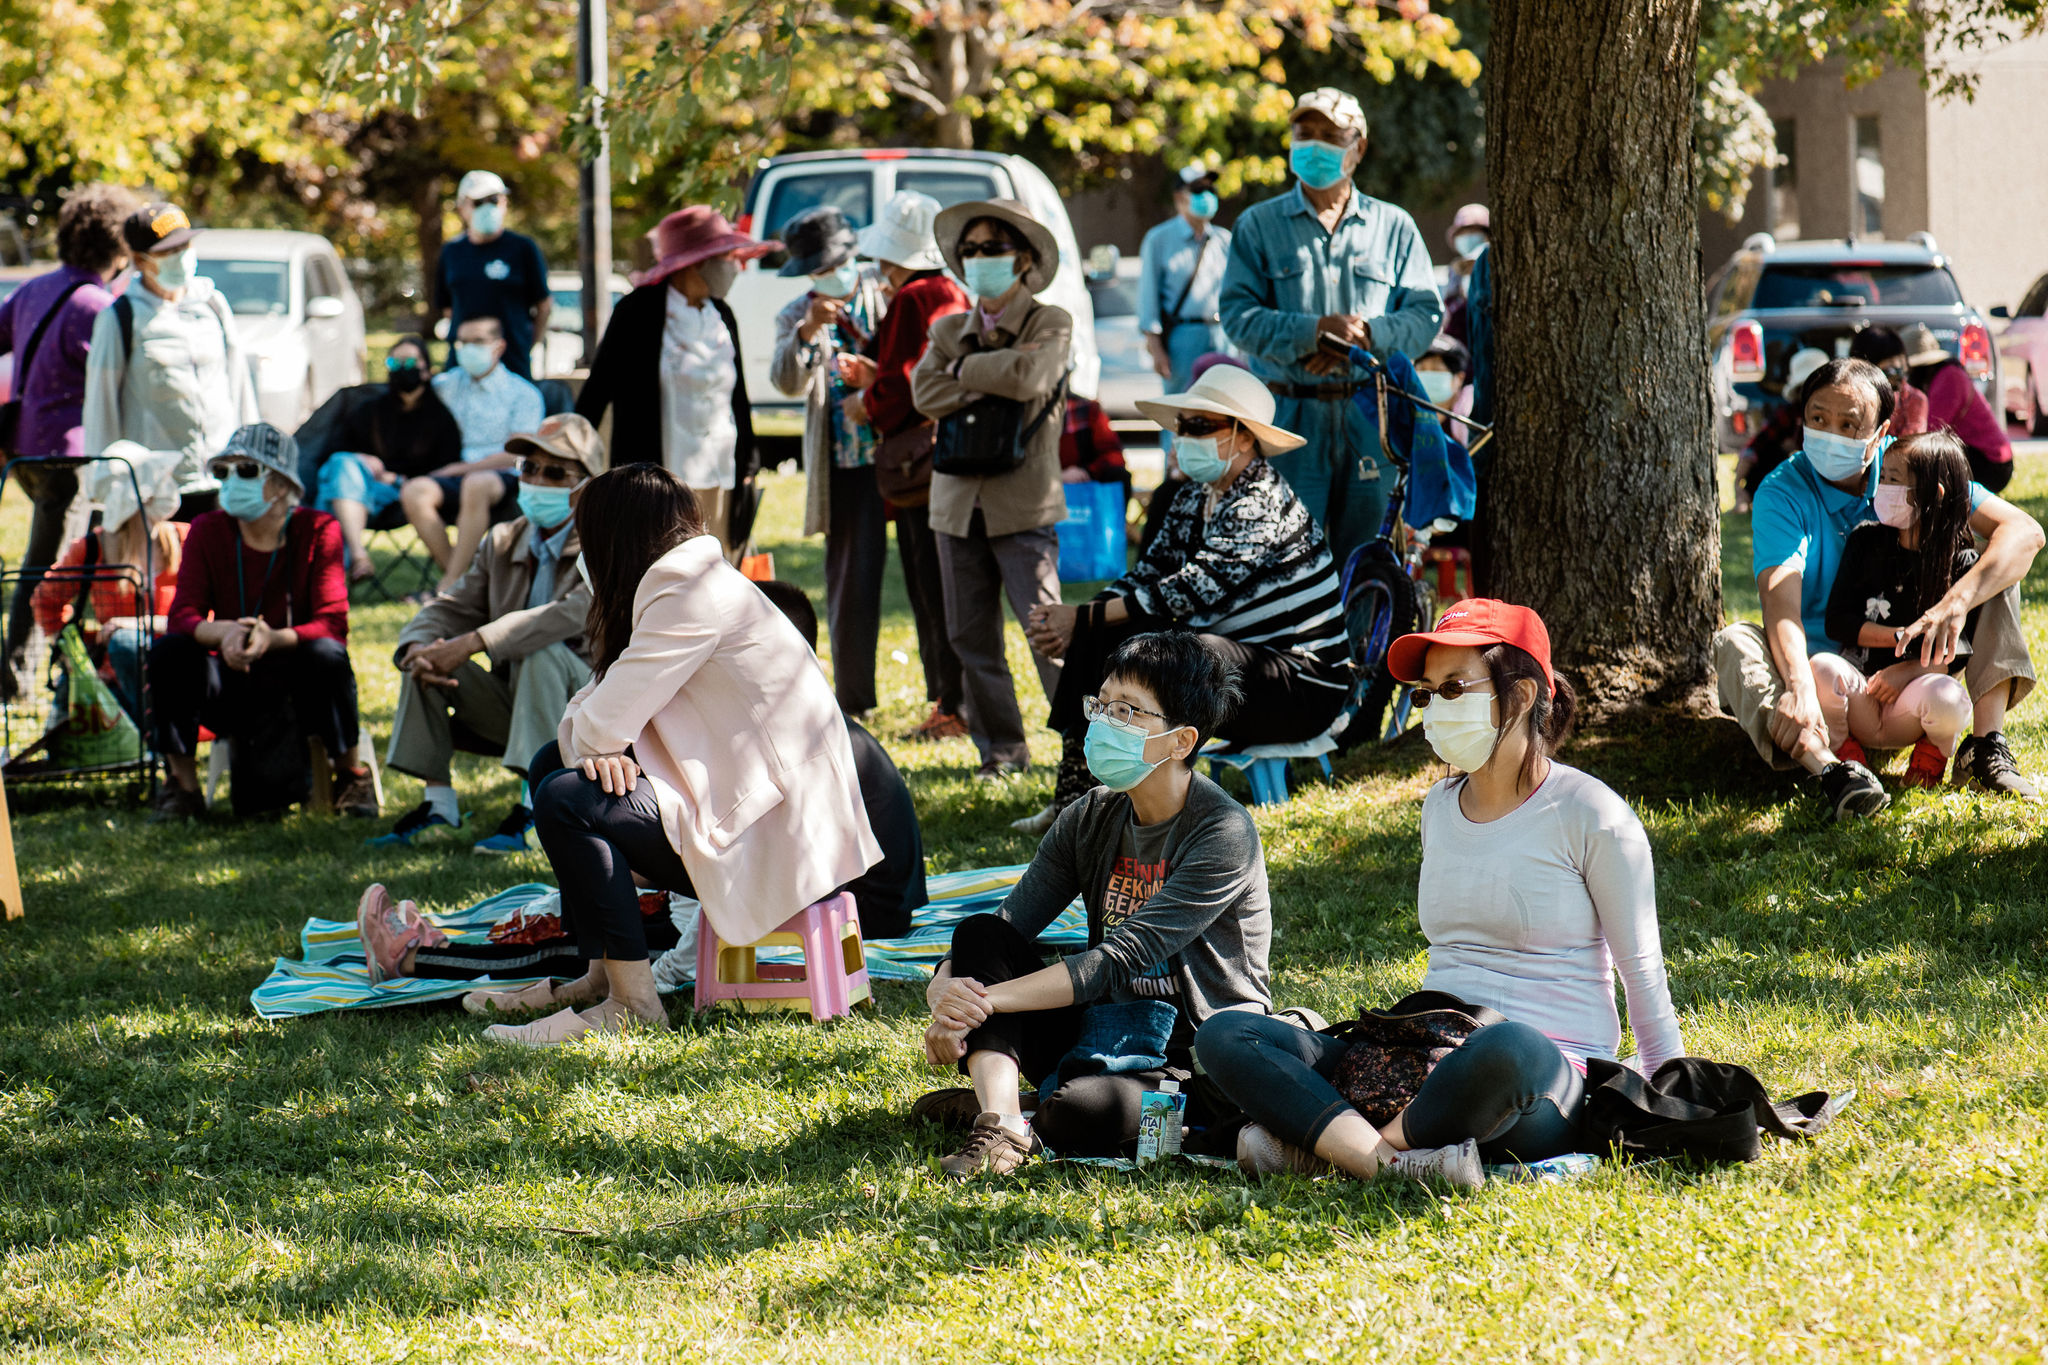 Audience members sit under a group of trees and watch a performance.